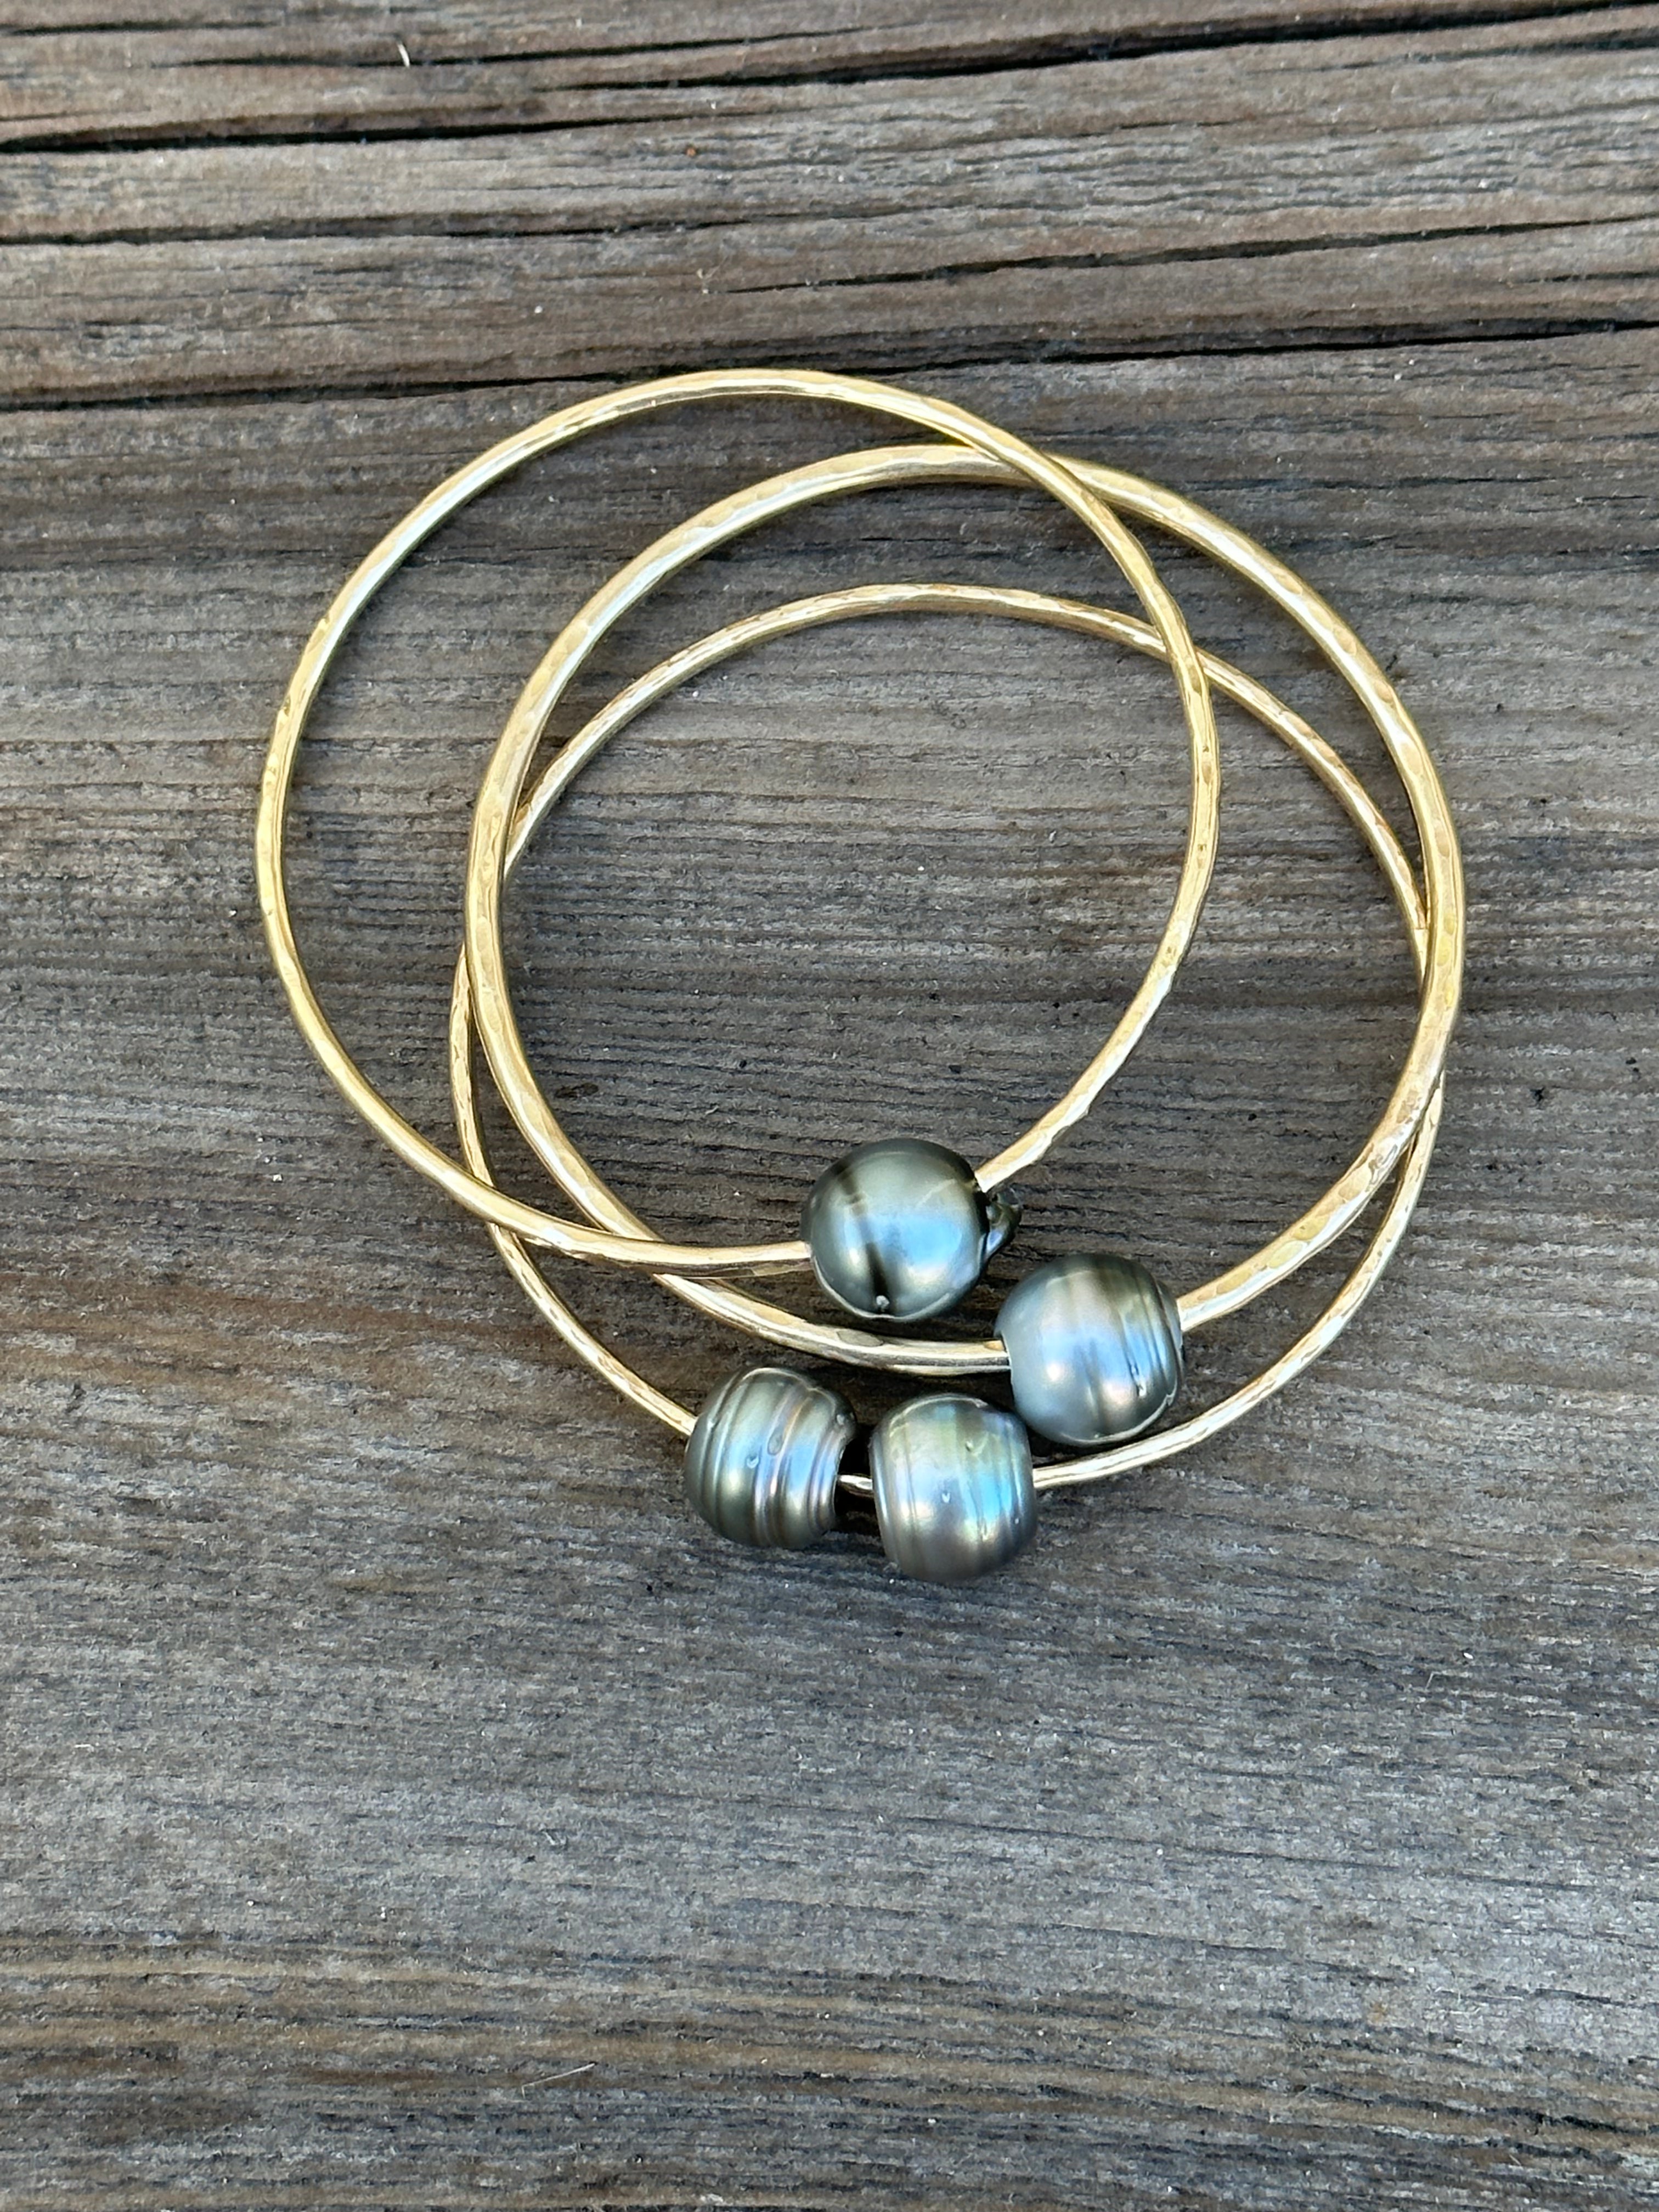 Three gold bangles with Tahitian pearls stacked on top of each other on a wood background.